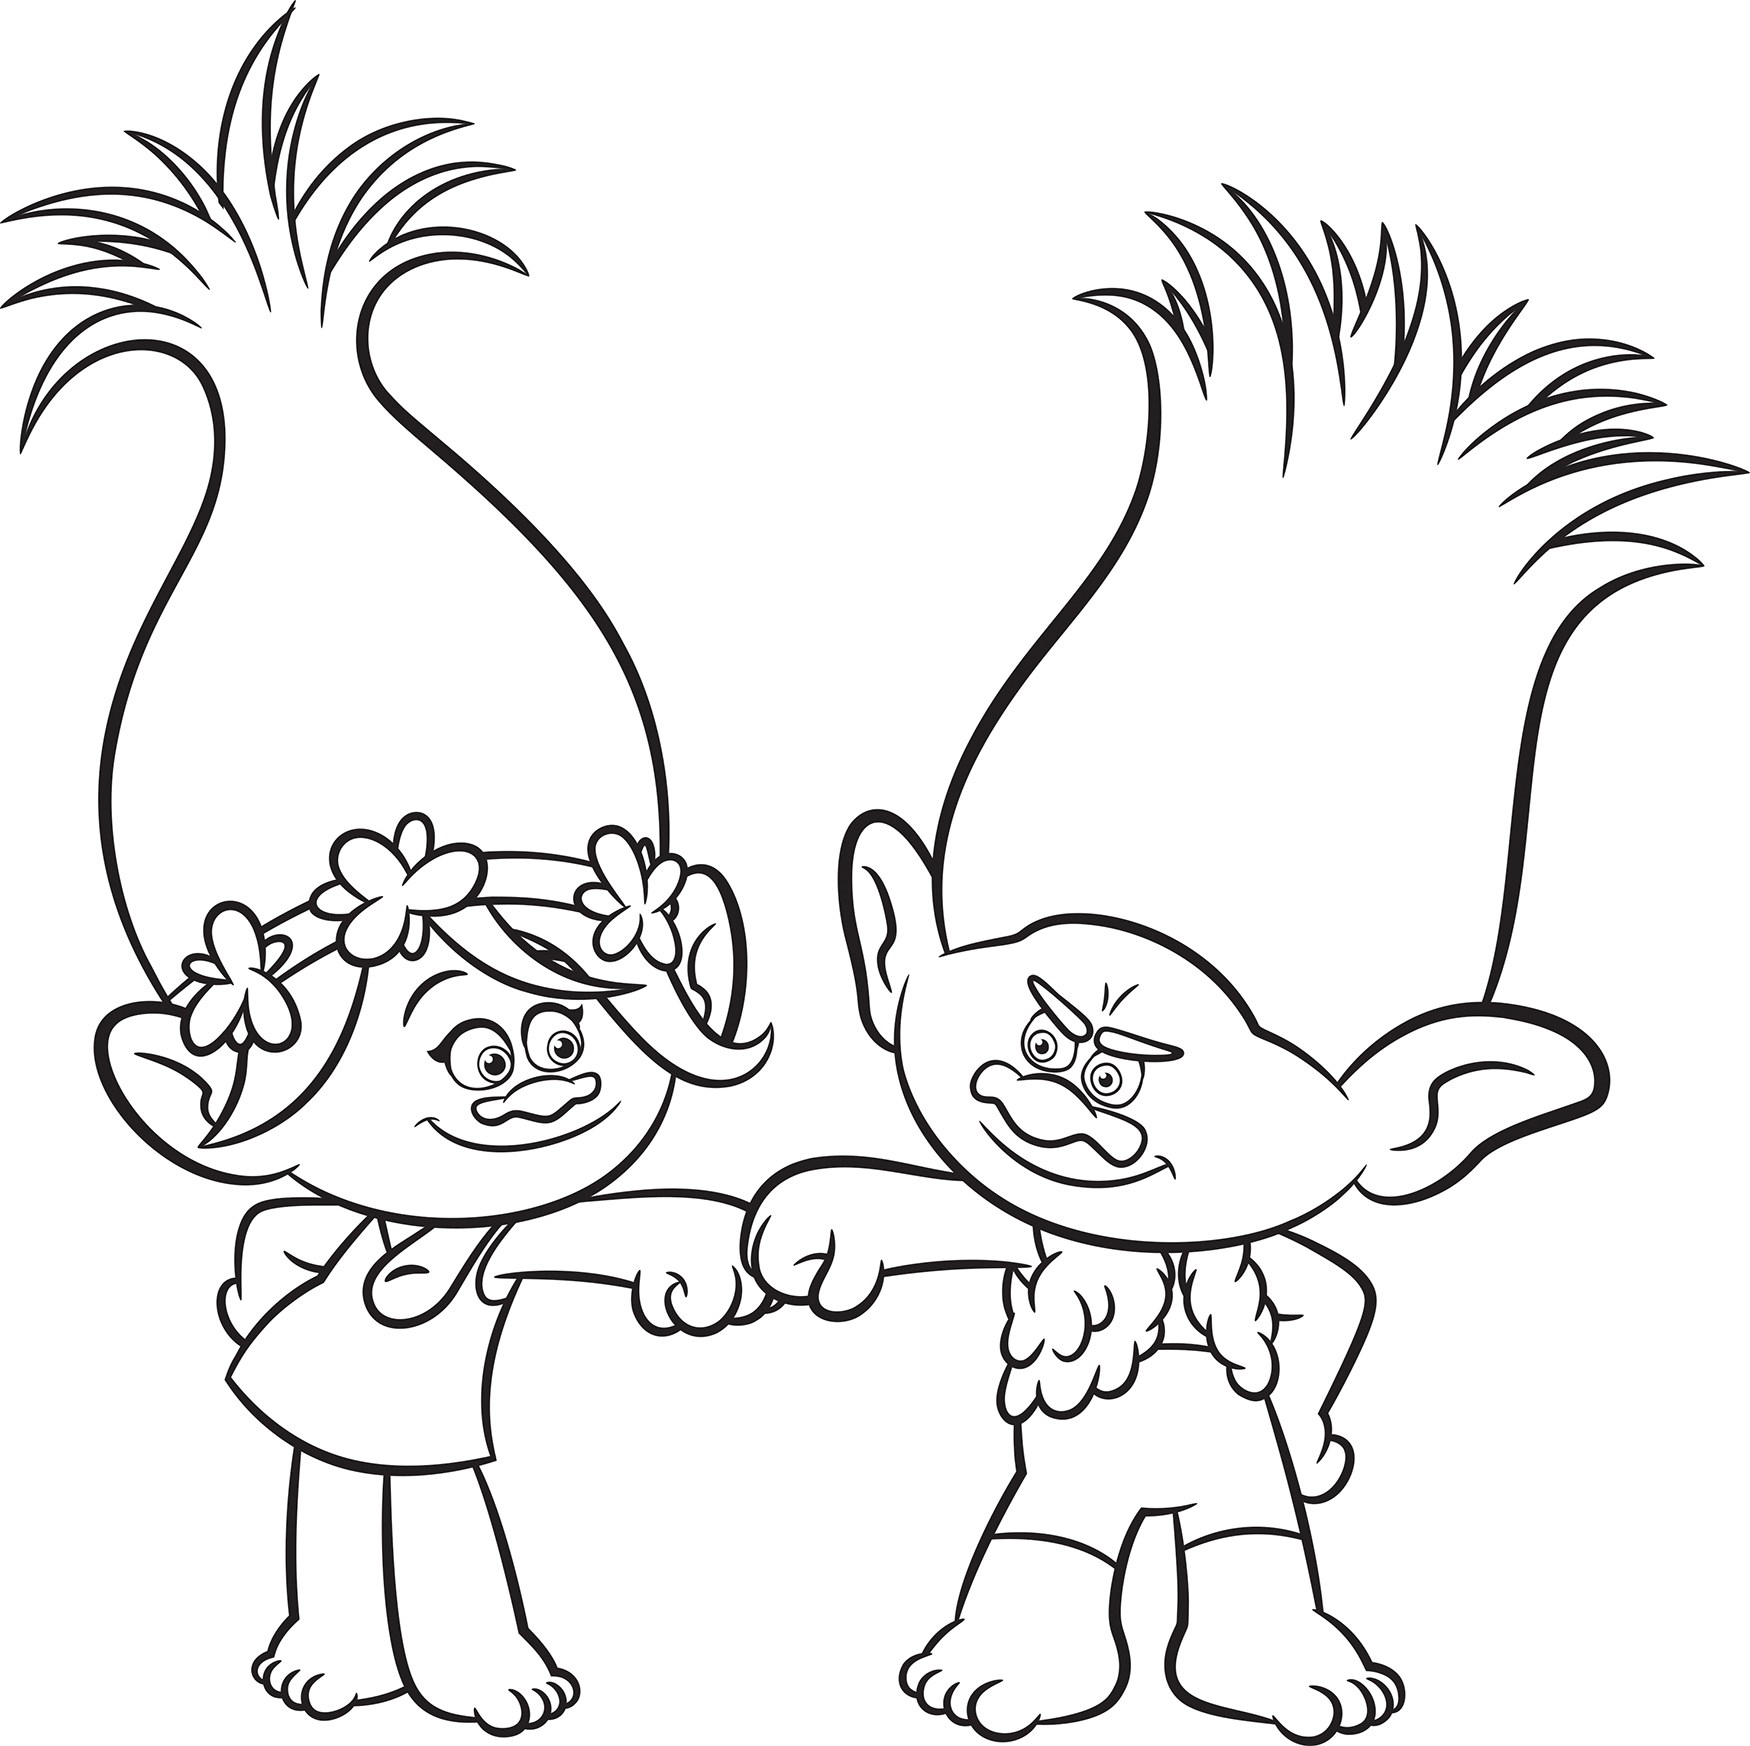 Trolls Coloring Pages Poppy and Branch